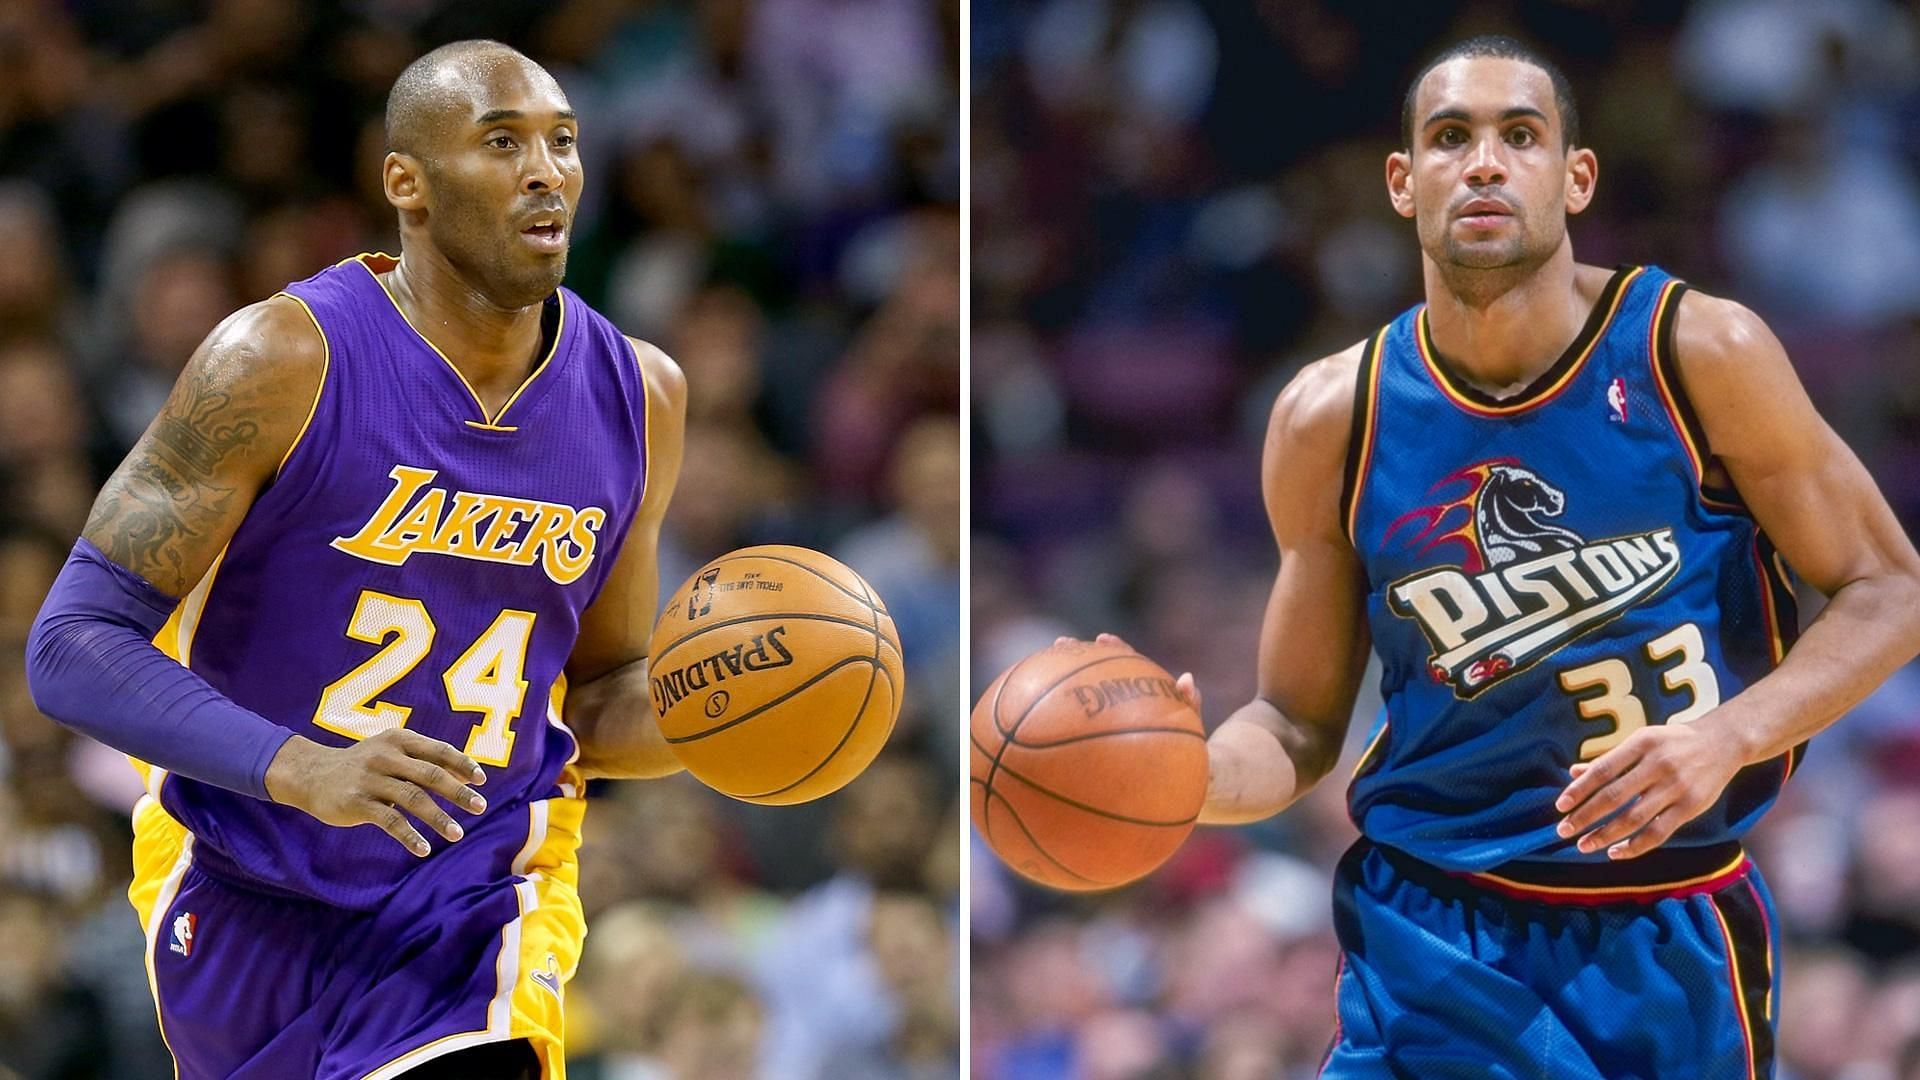 Basketball would have been so much better had a Grant Hill and Kobe Bryant rivalry developed. [Photo: Sporting News]